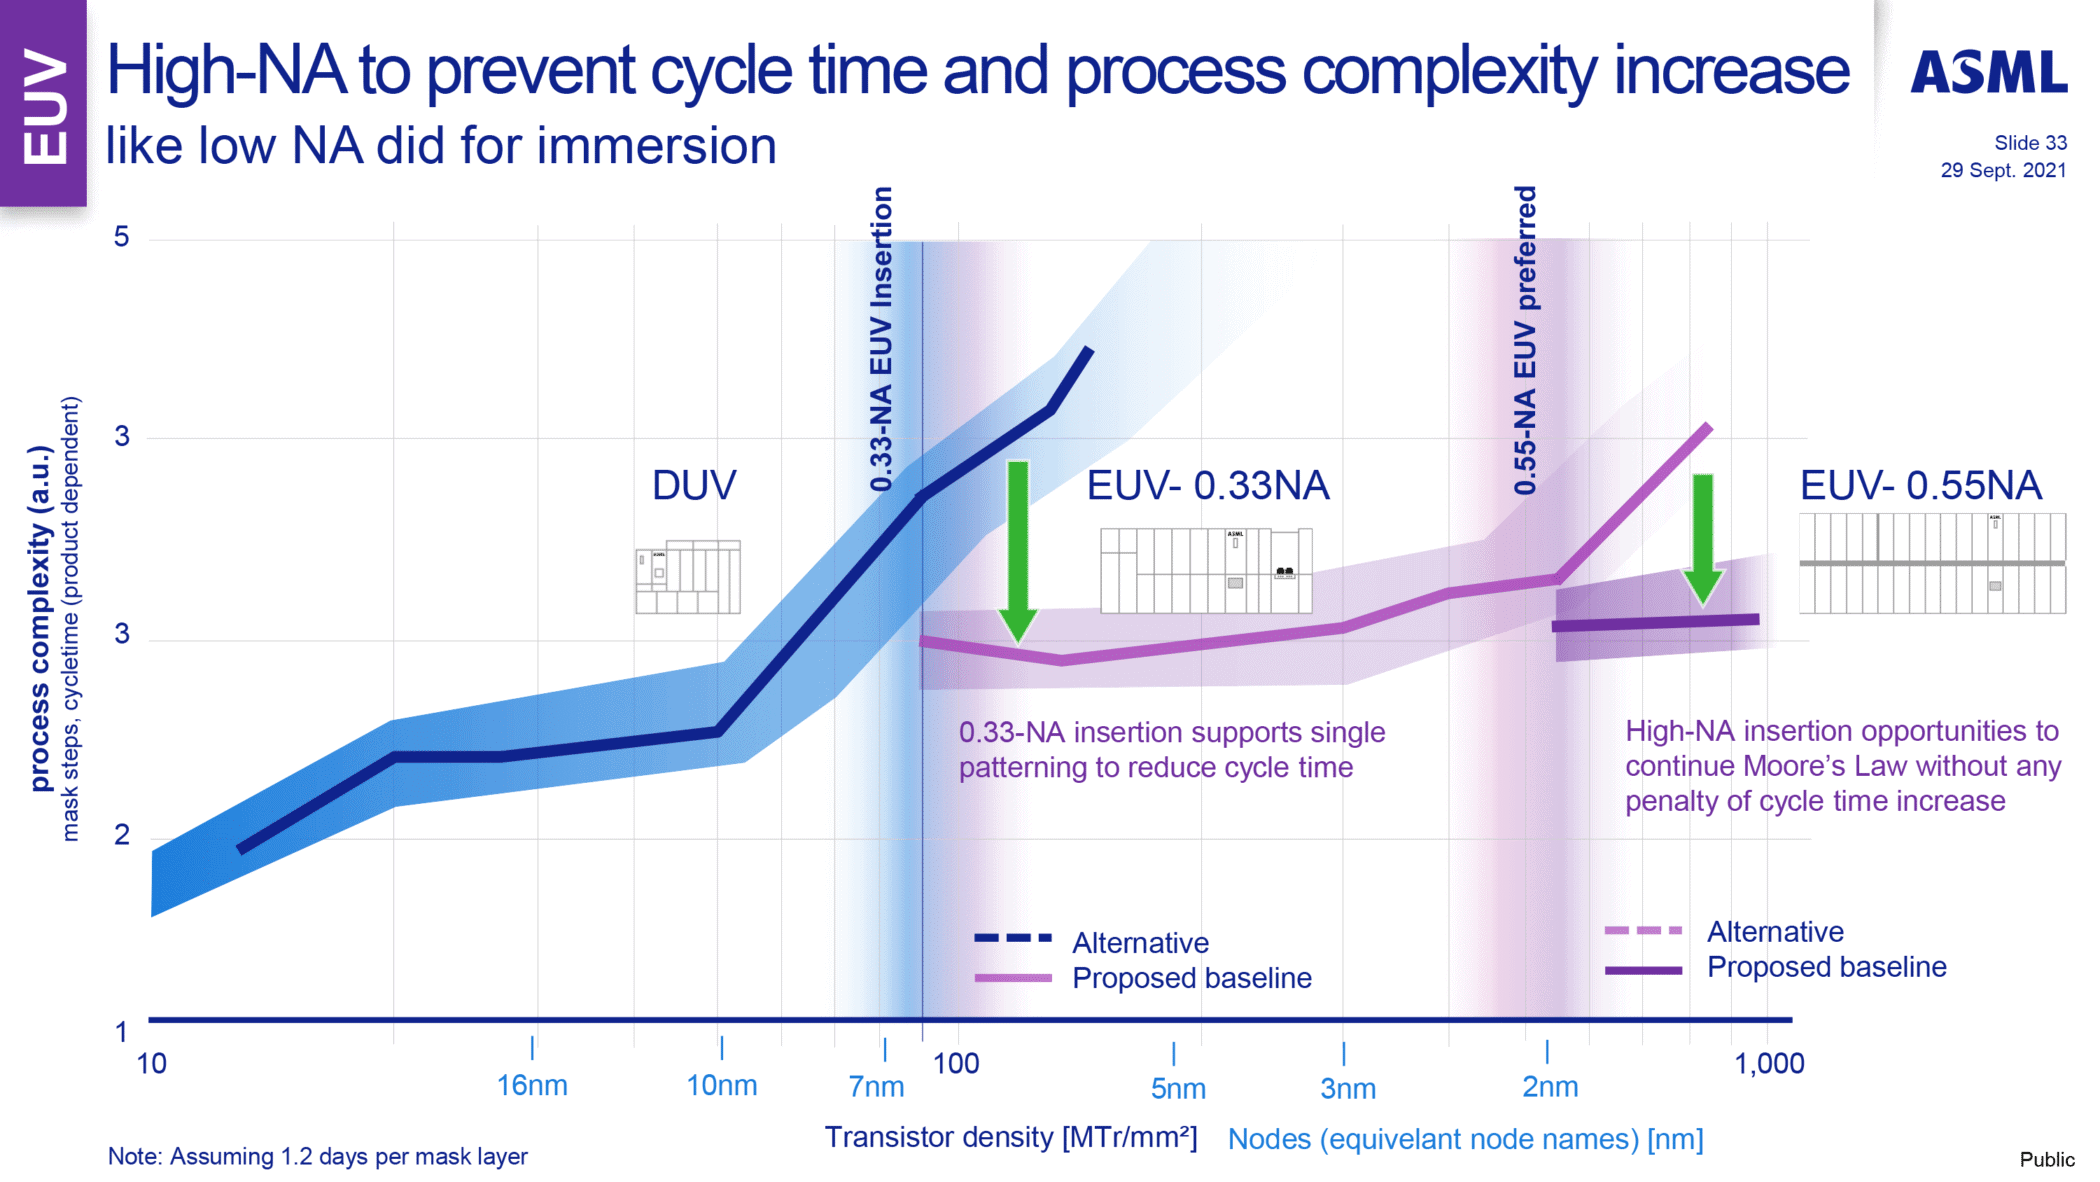 asml high na prevent cycle time and process complexity increase